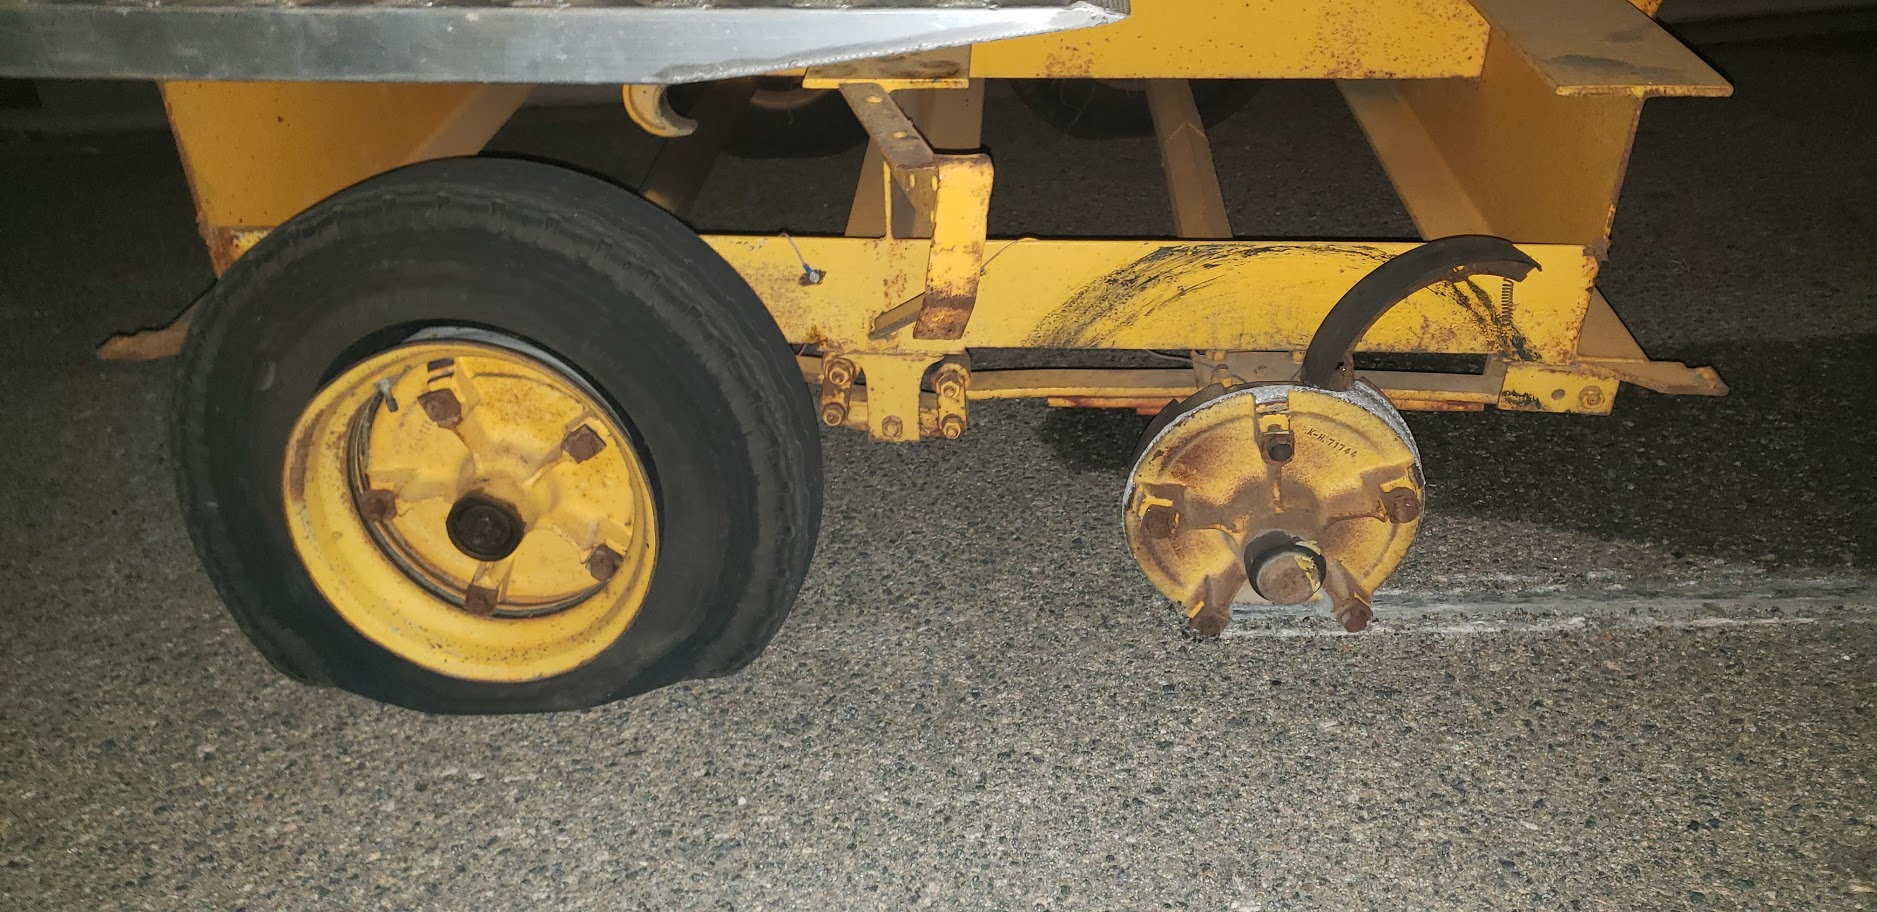 Are Mobile Home Axles Legal On Trailers